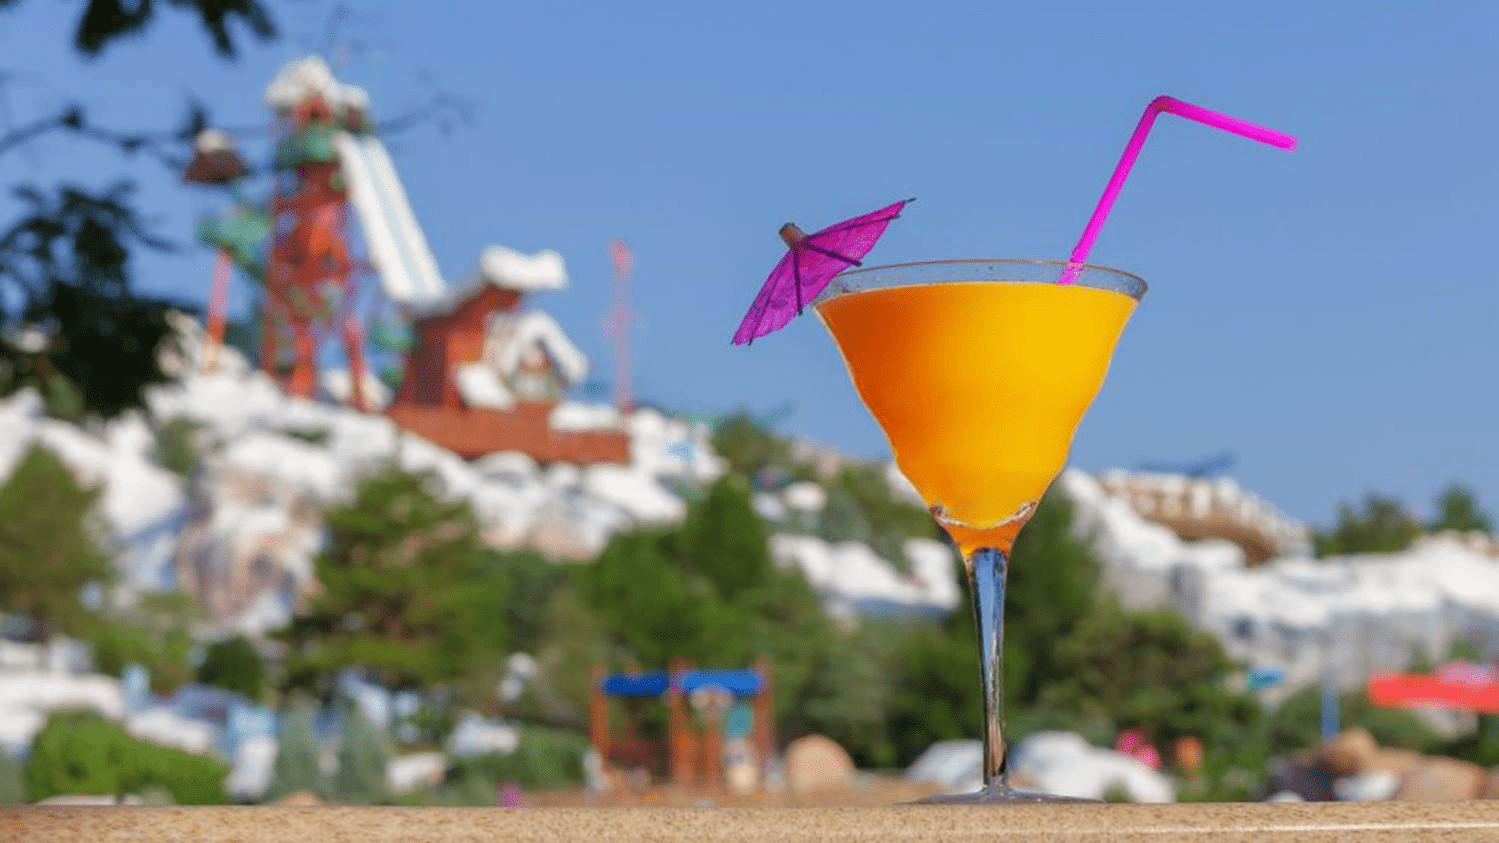 There’s a full-service beach bar serving Blizzard Beach-inspired cocktails